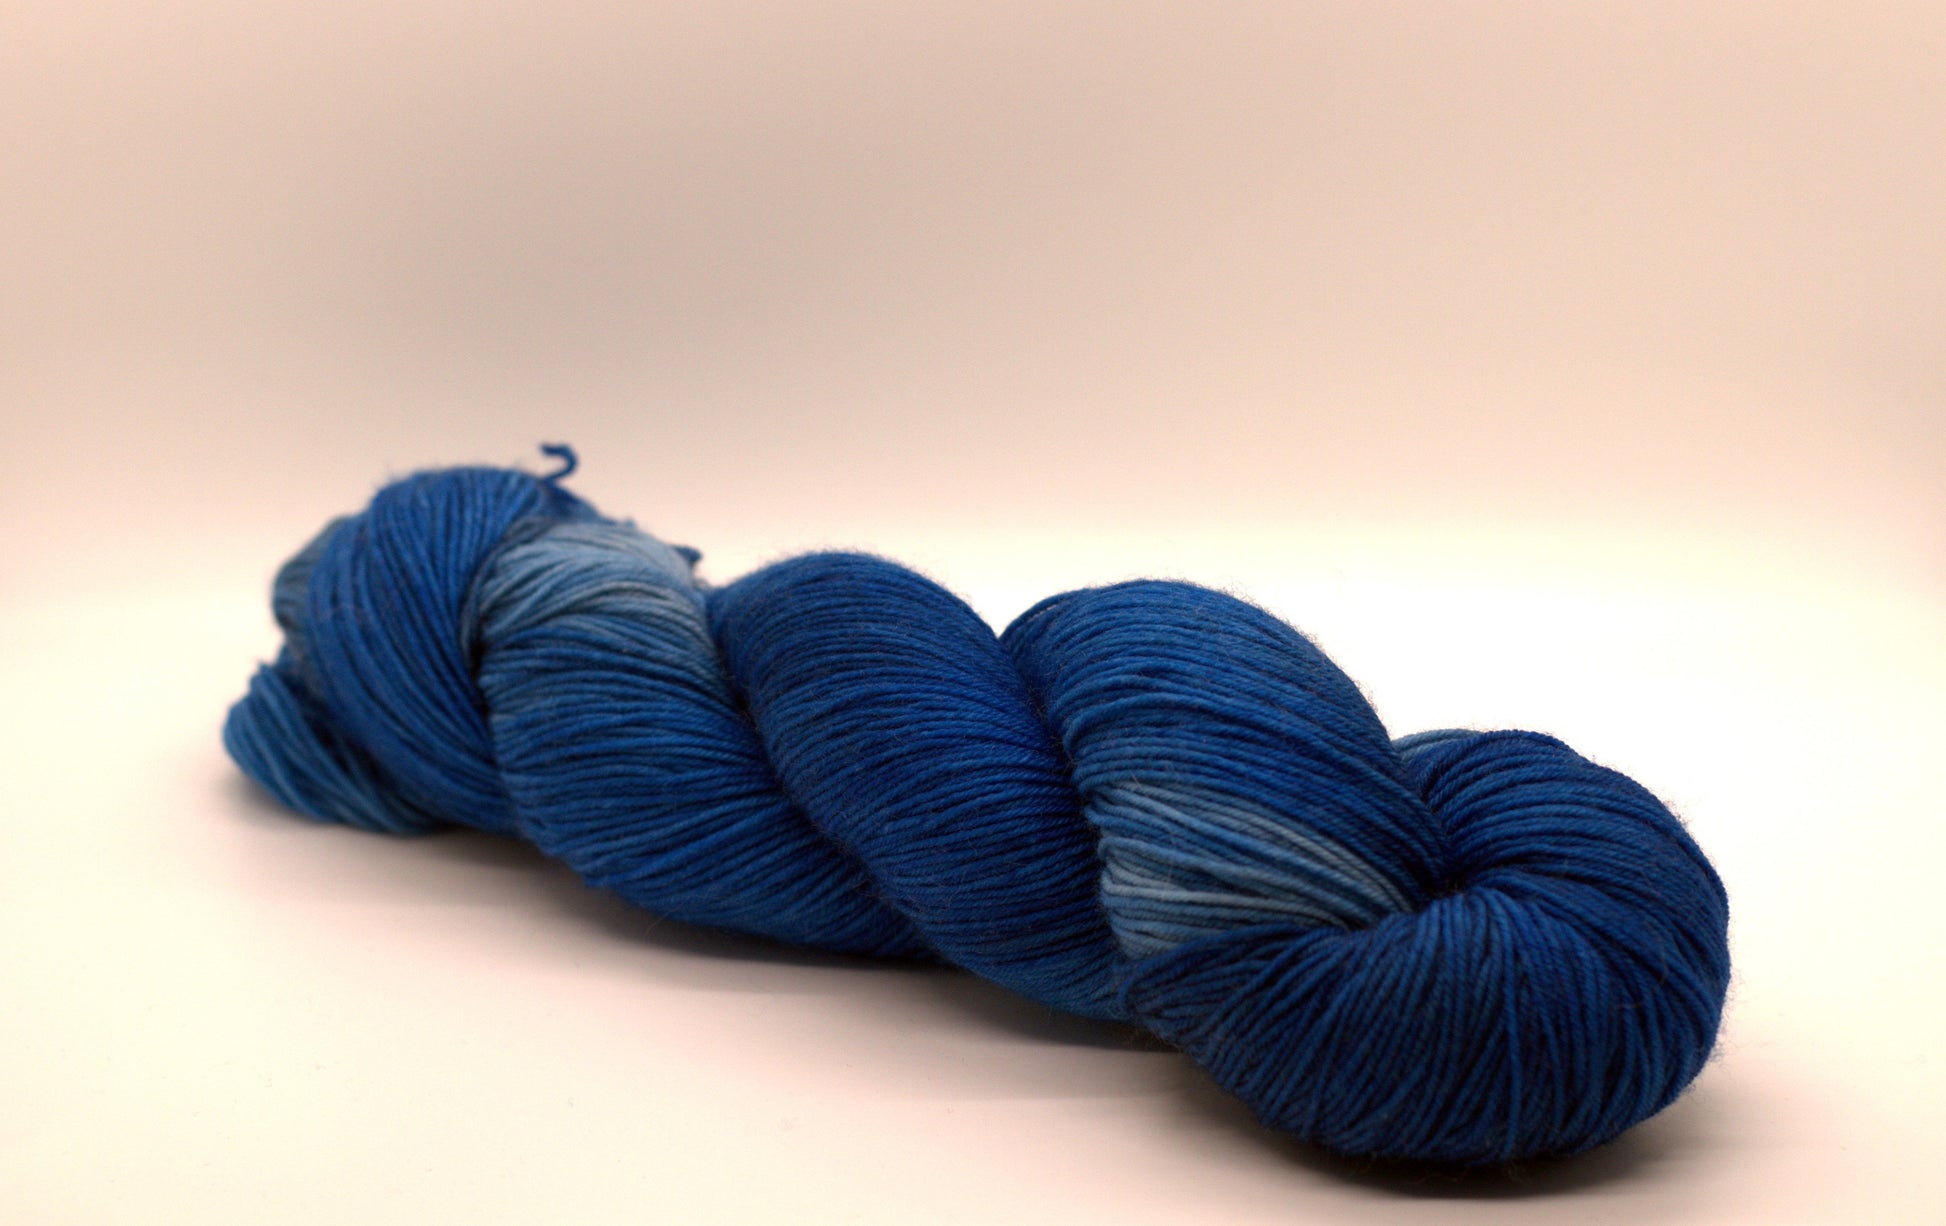 One twisted skein tonal peacock blue yarn on white background.